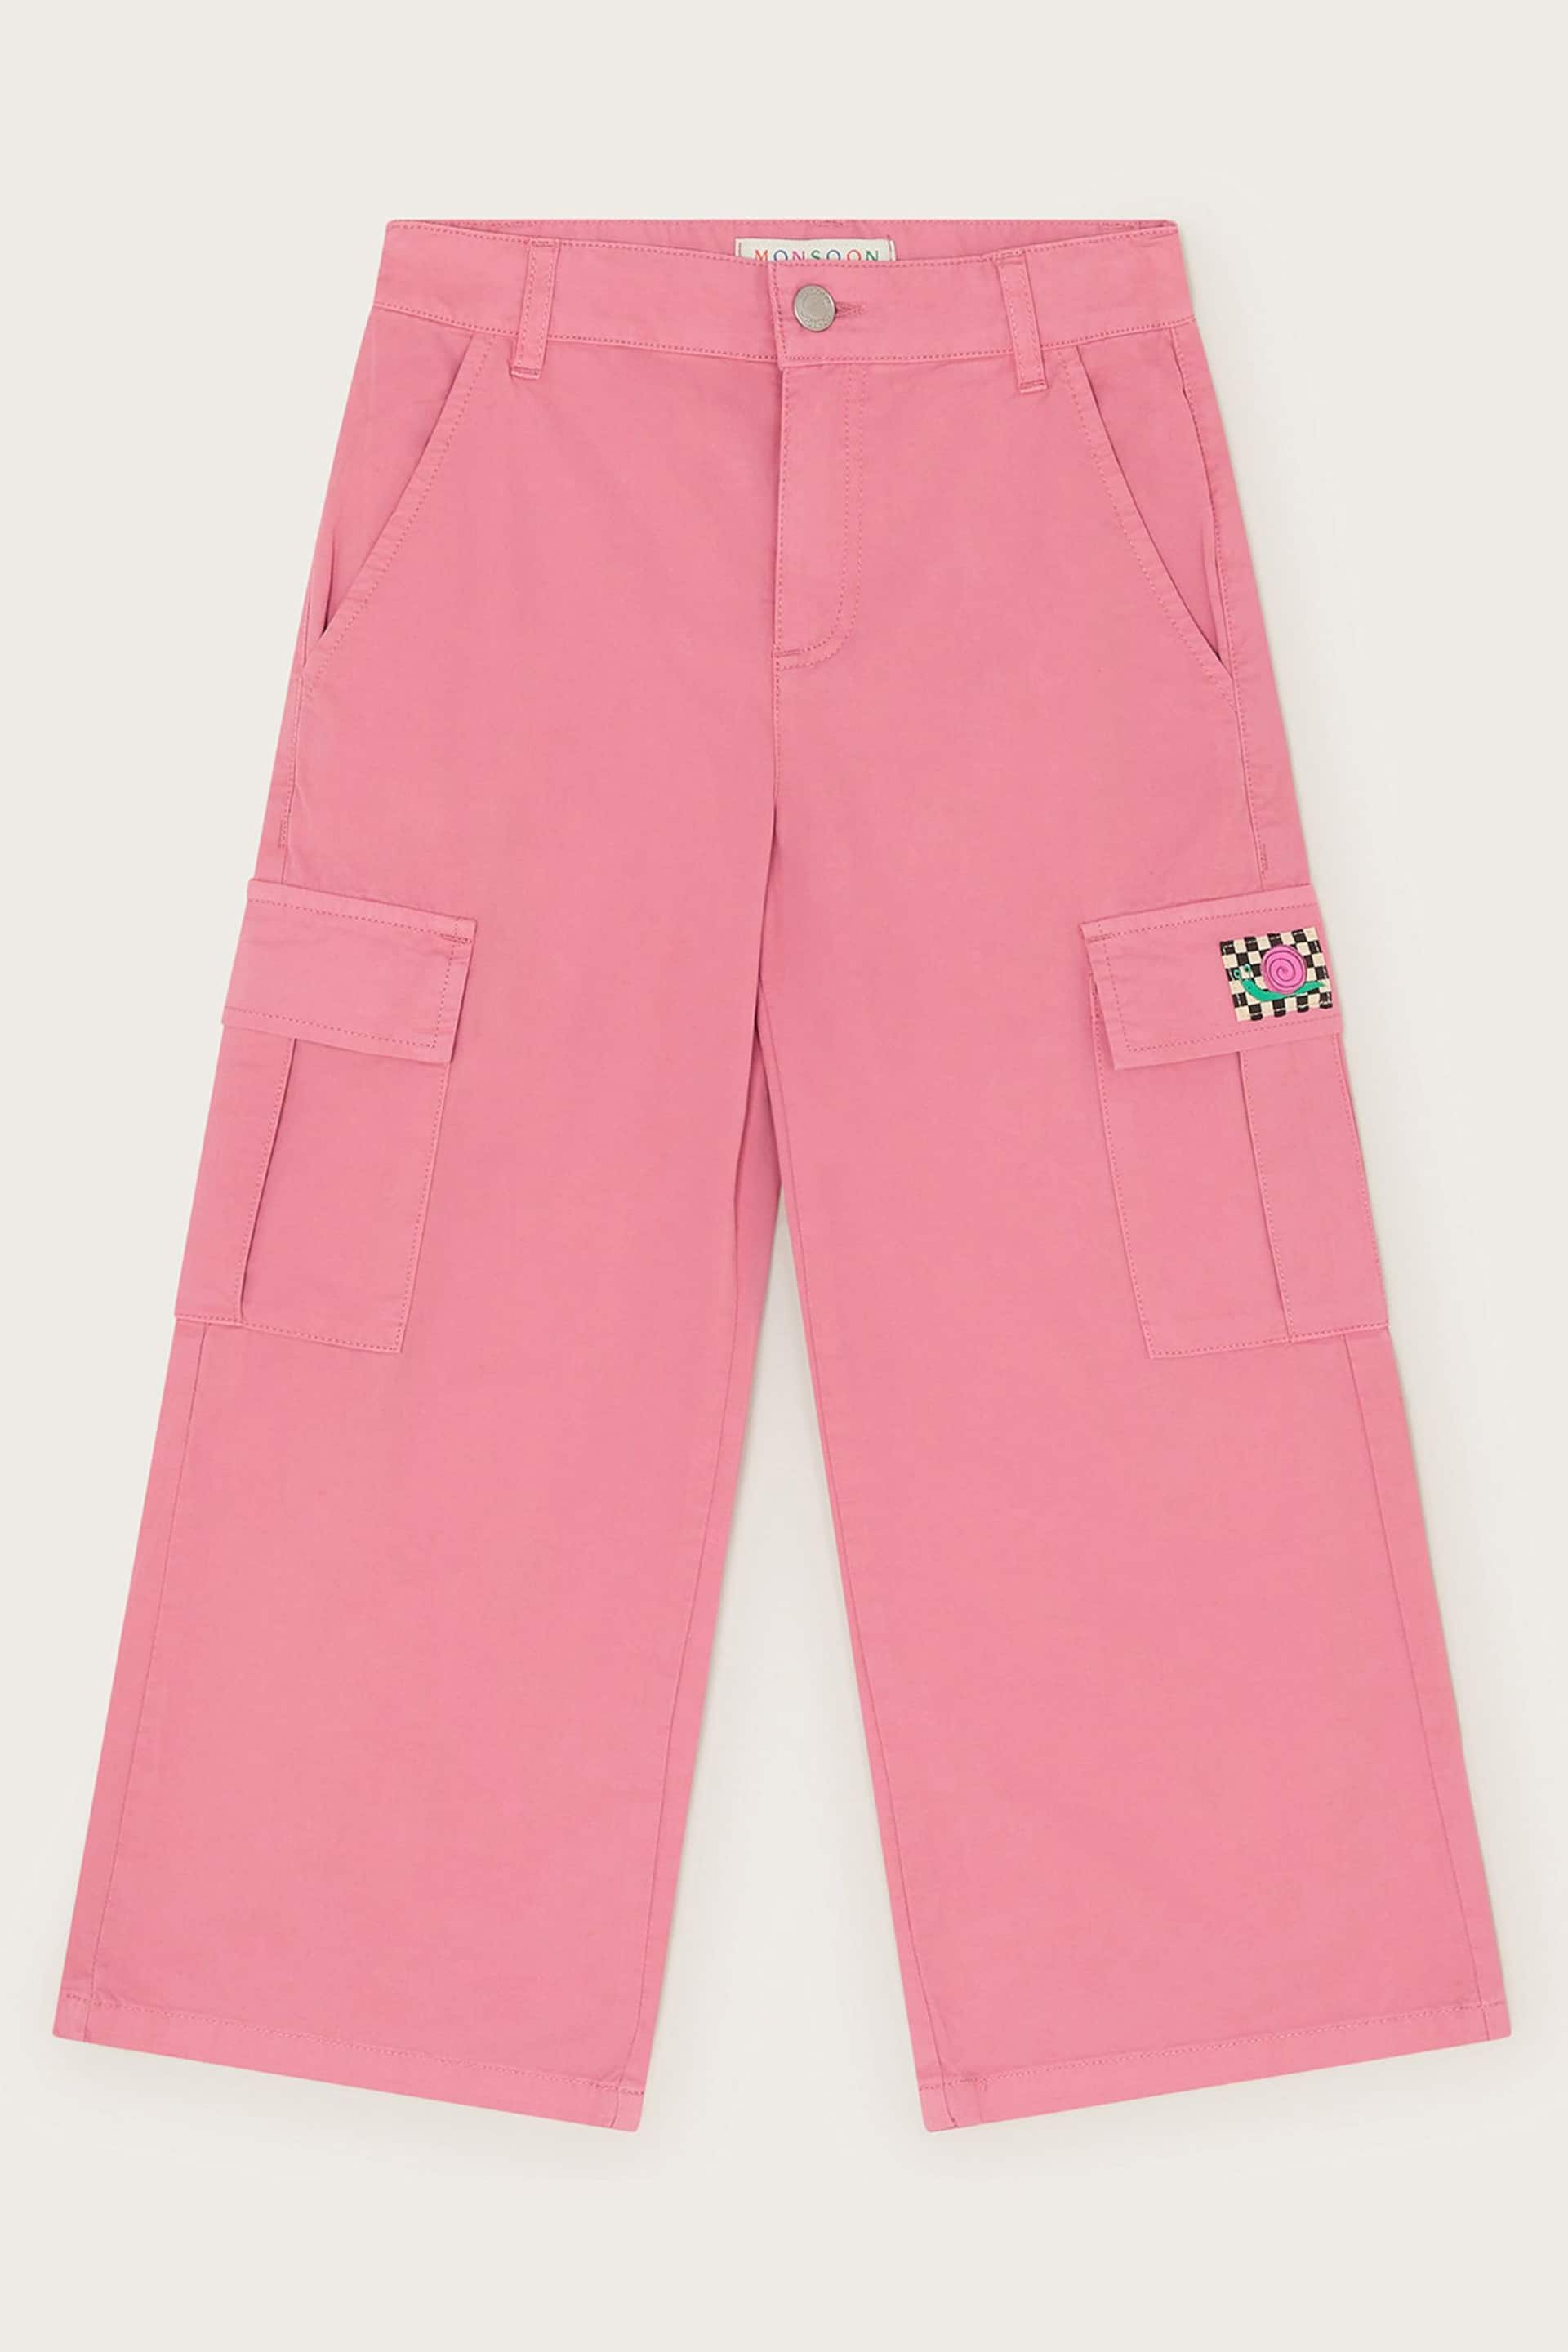 Monsoon Utility Trousers - Image 1 of 3